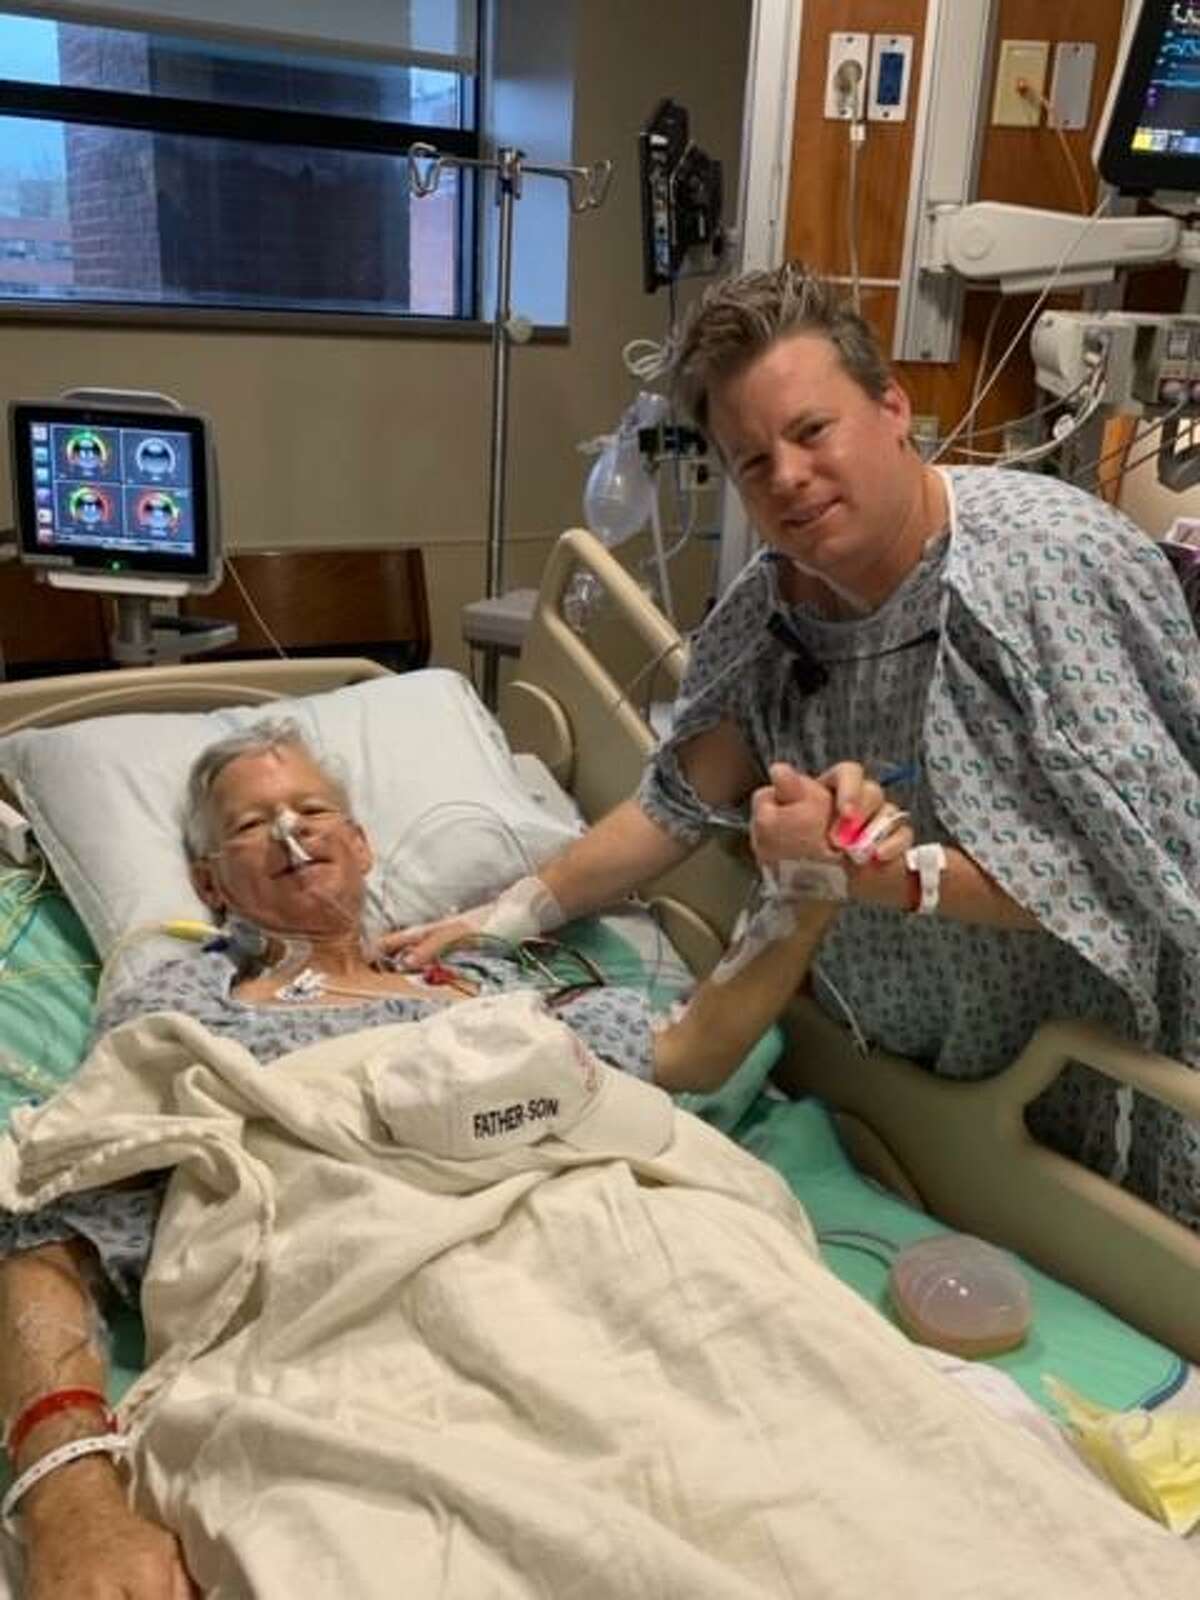 Louis Huey needed a new liver, so Michael Huey donated part of his to save his father's life. While living donor transplants are safe, the procedures are rare for liver transplants, according to the University of Pittsburgh Medical Center.